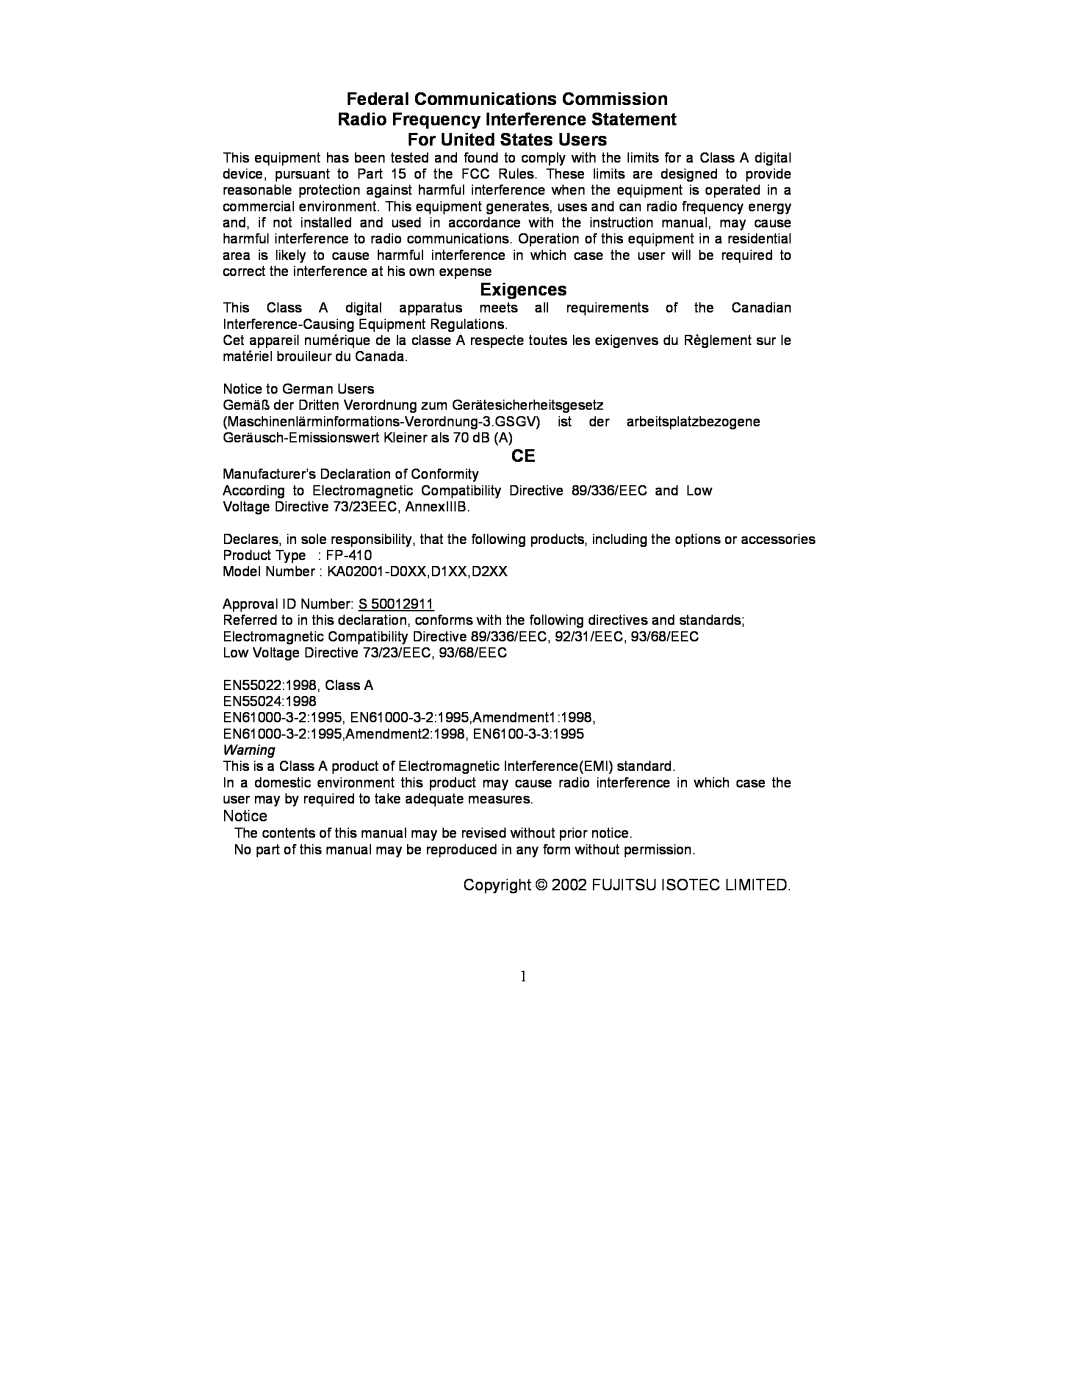 Fujitsu FP-410 Federal Communications Commission, Radio Frequency Interference Statement For United States Users 